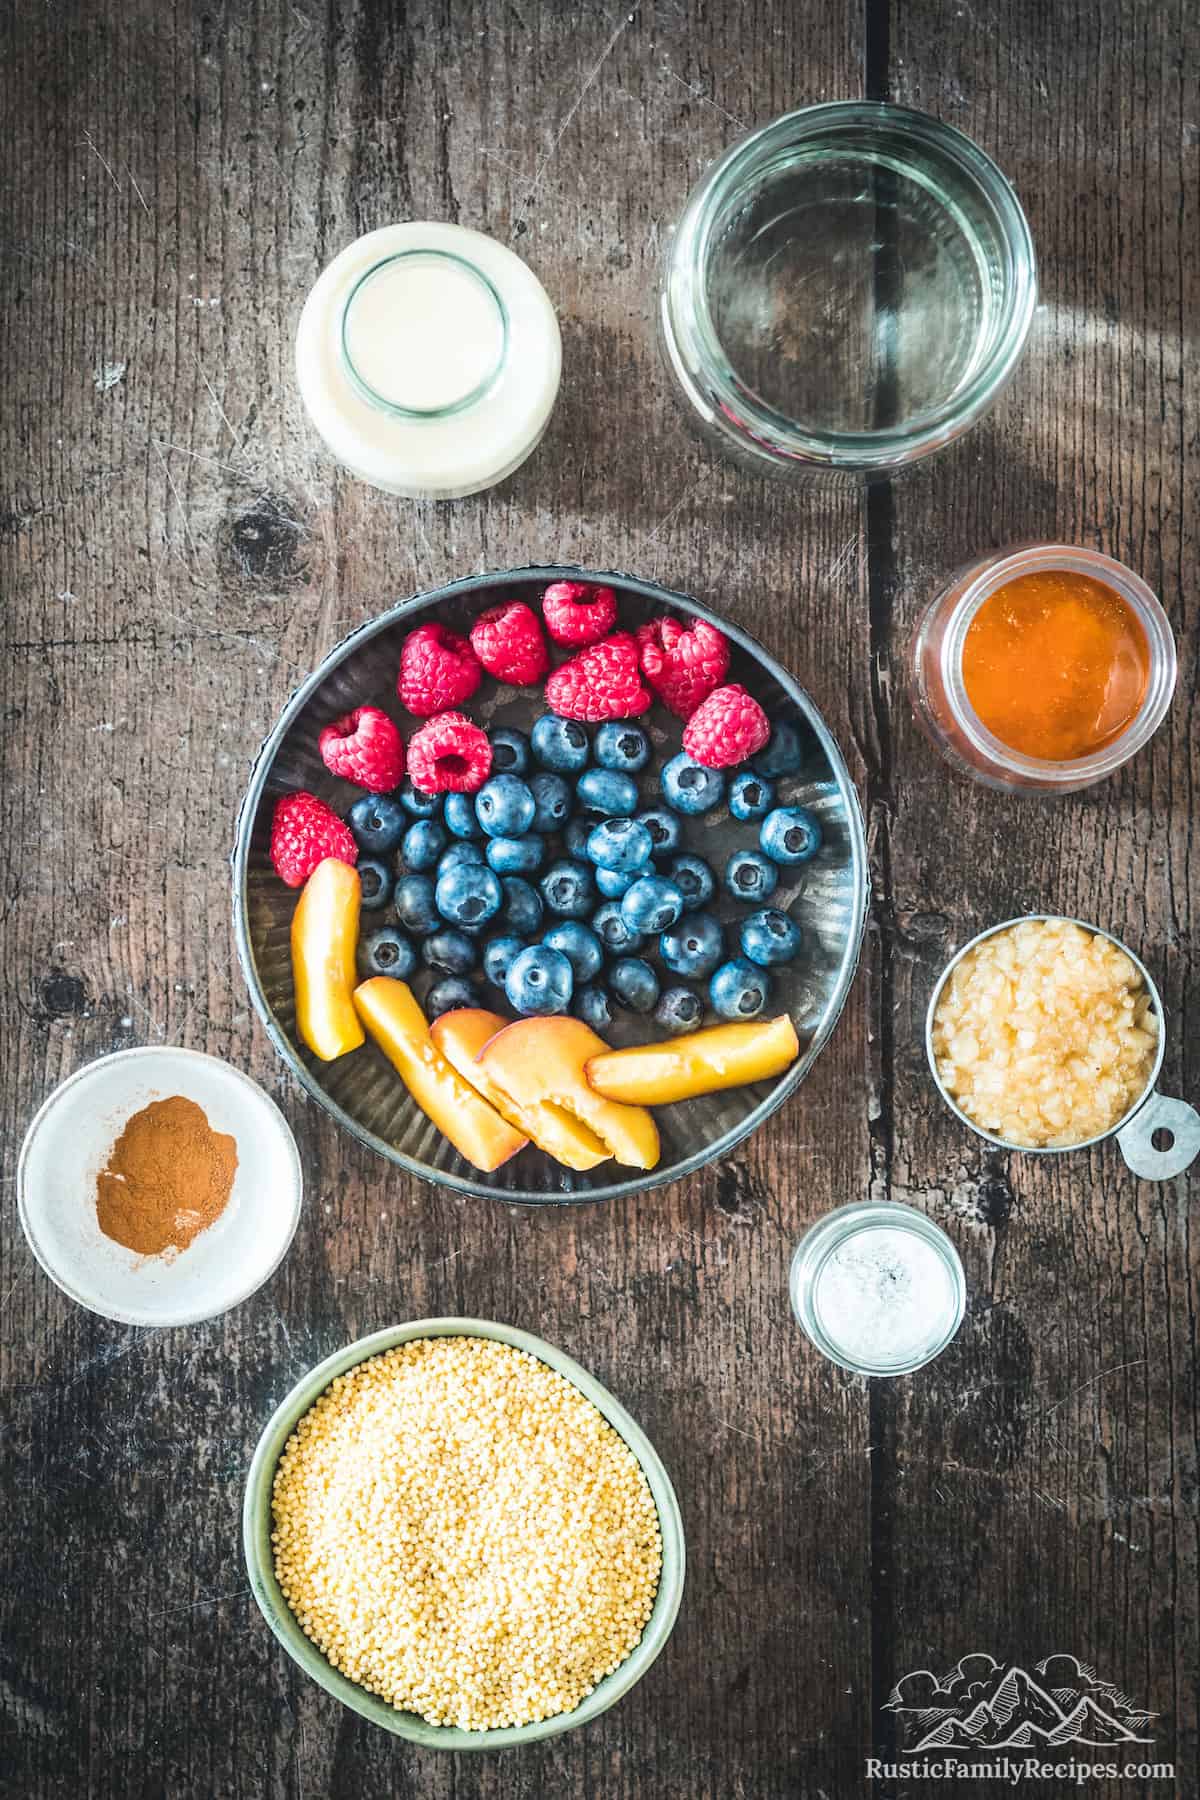 Ingredients for millet porridge with fresh fruit: milk, water, agave, cooked millet, salt, raw millet grains, ground cinnamon, with chopped fresh fruit and berries.